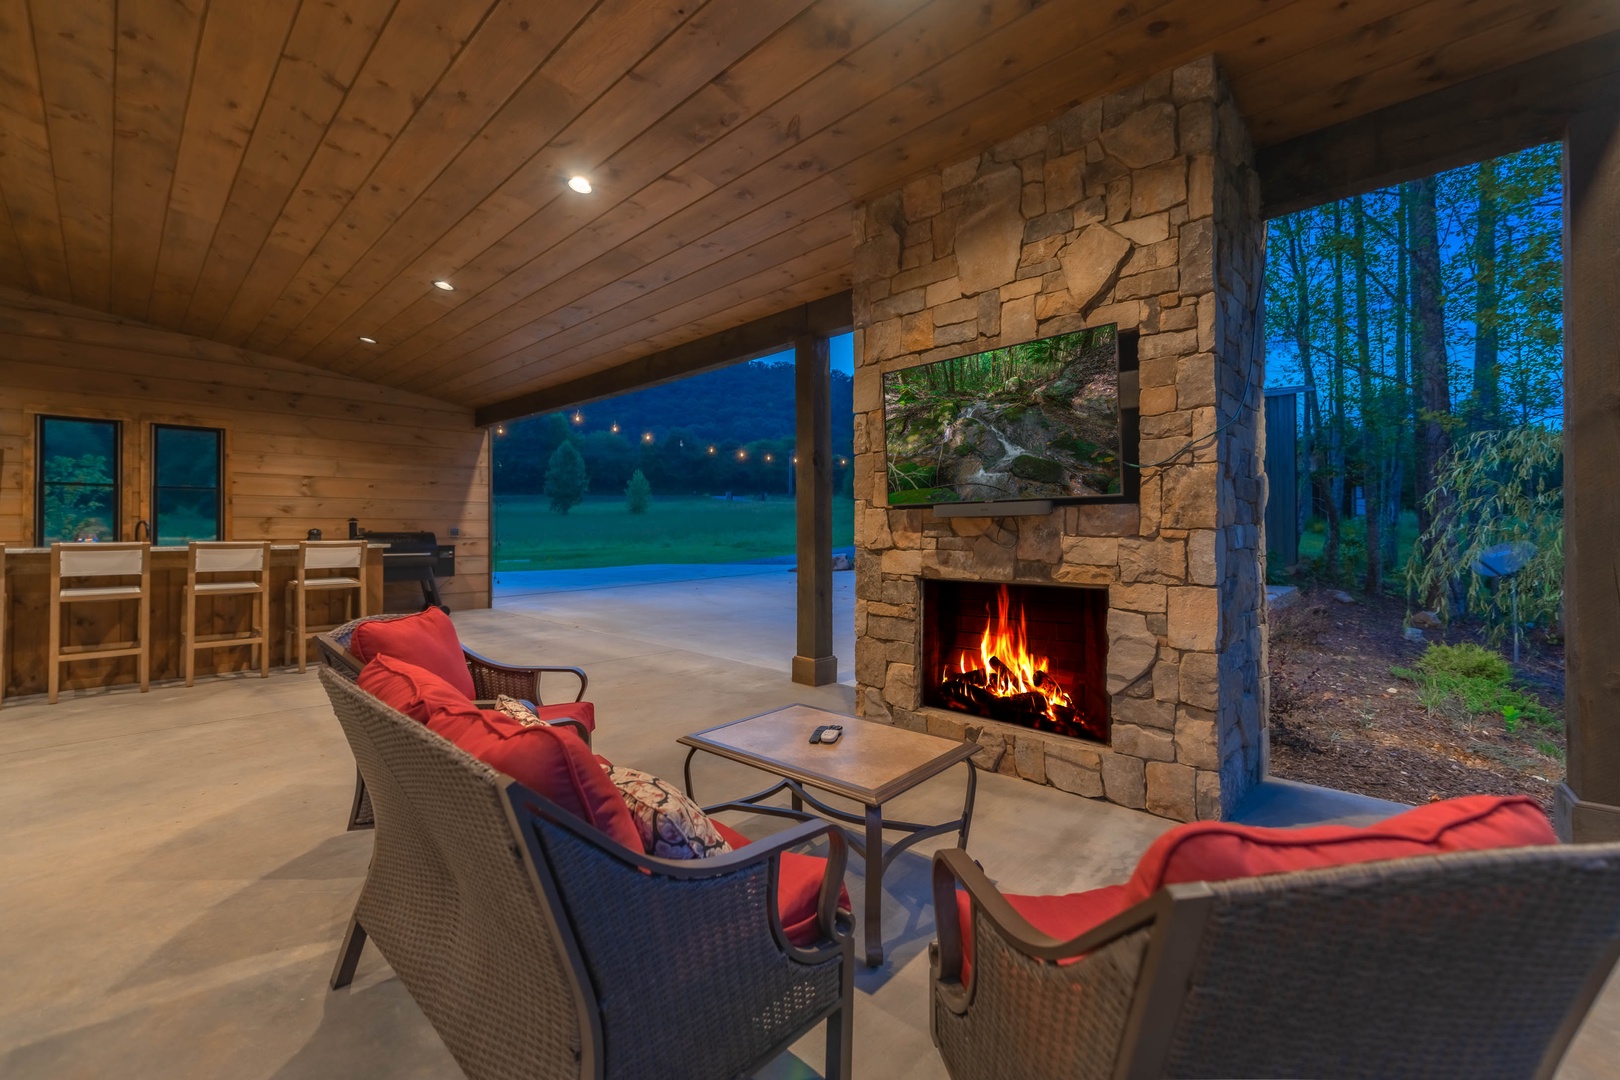 Cohutta Mountain Retreat- Outdoor fireplace and seating